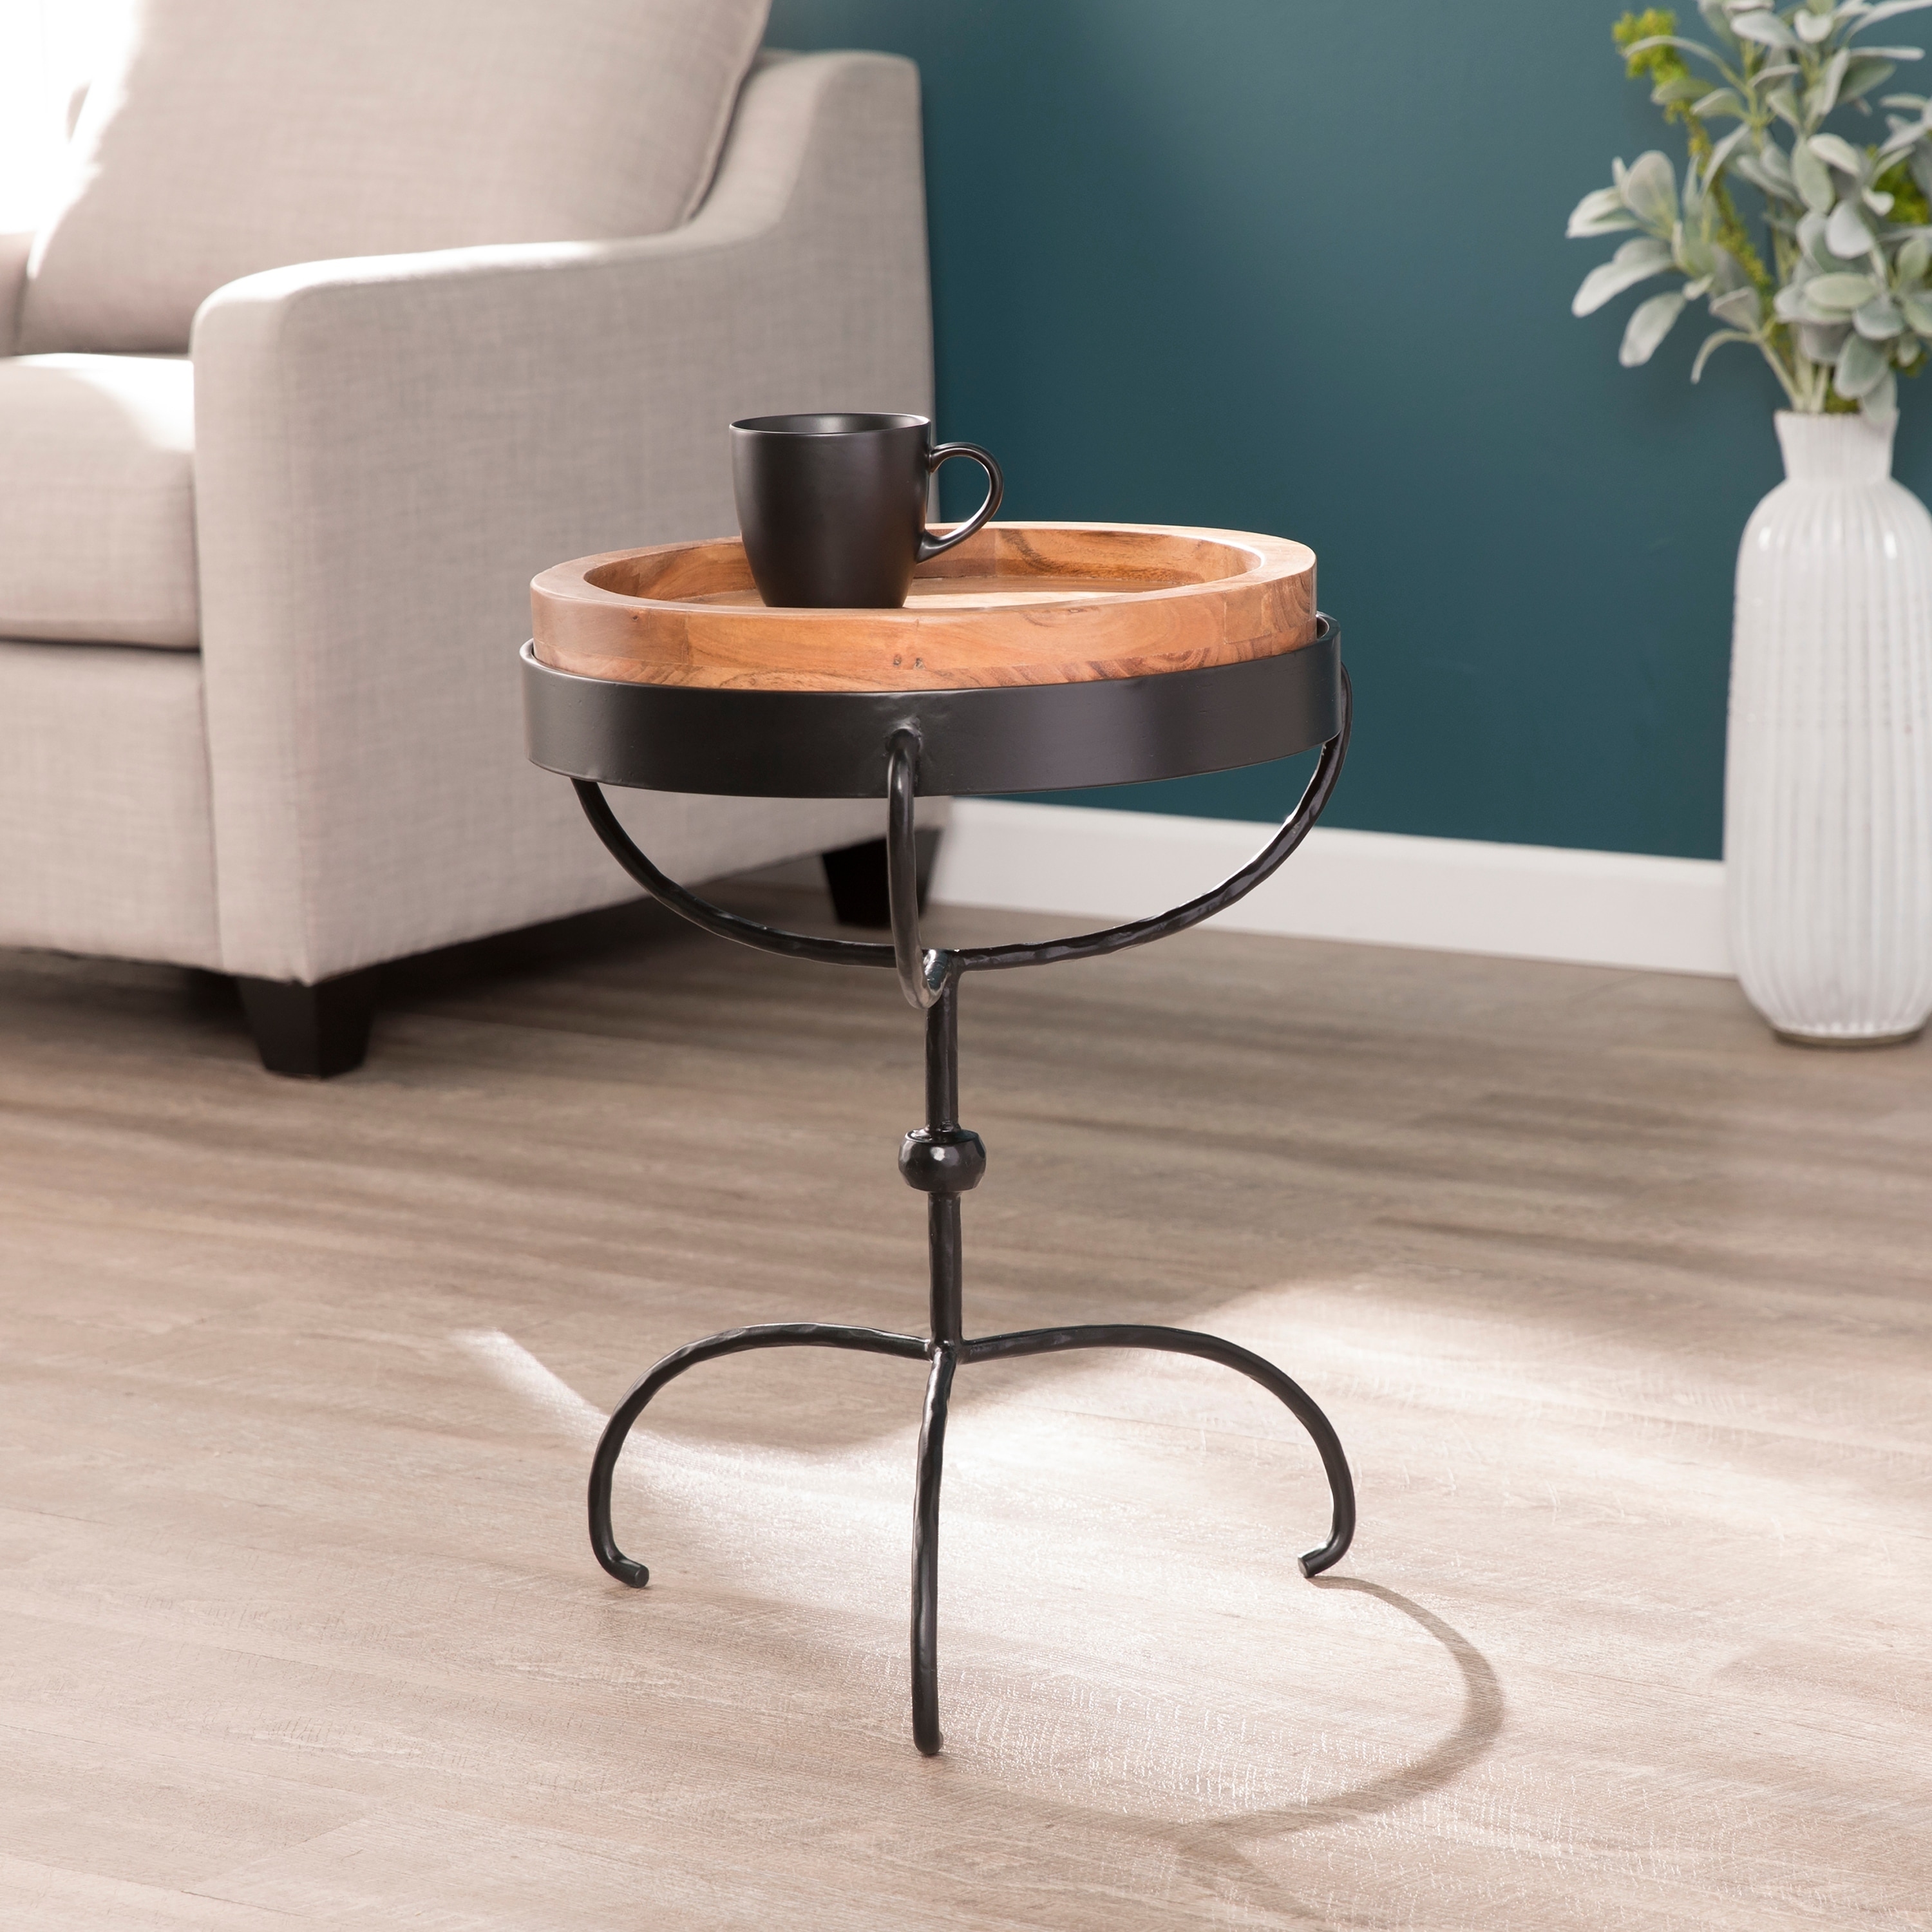 harper blvd ardac round accent table serving tray free with hairpin legs ikea mercury lamp battery operated side lamps basket drawers living room sets southern butterfly freedom